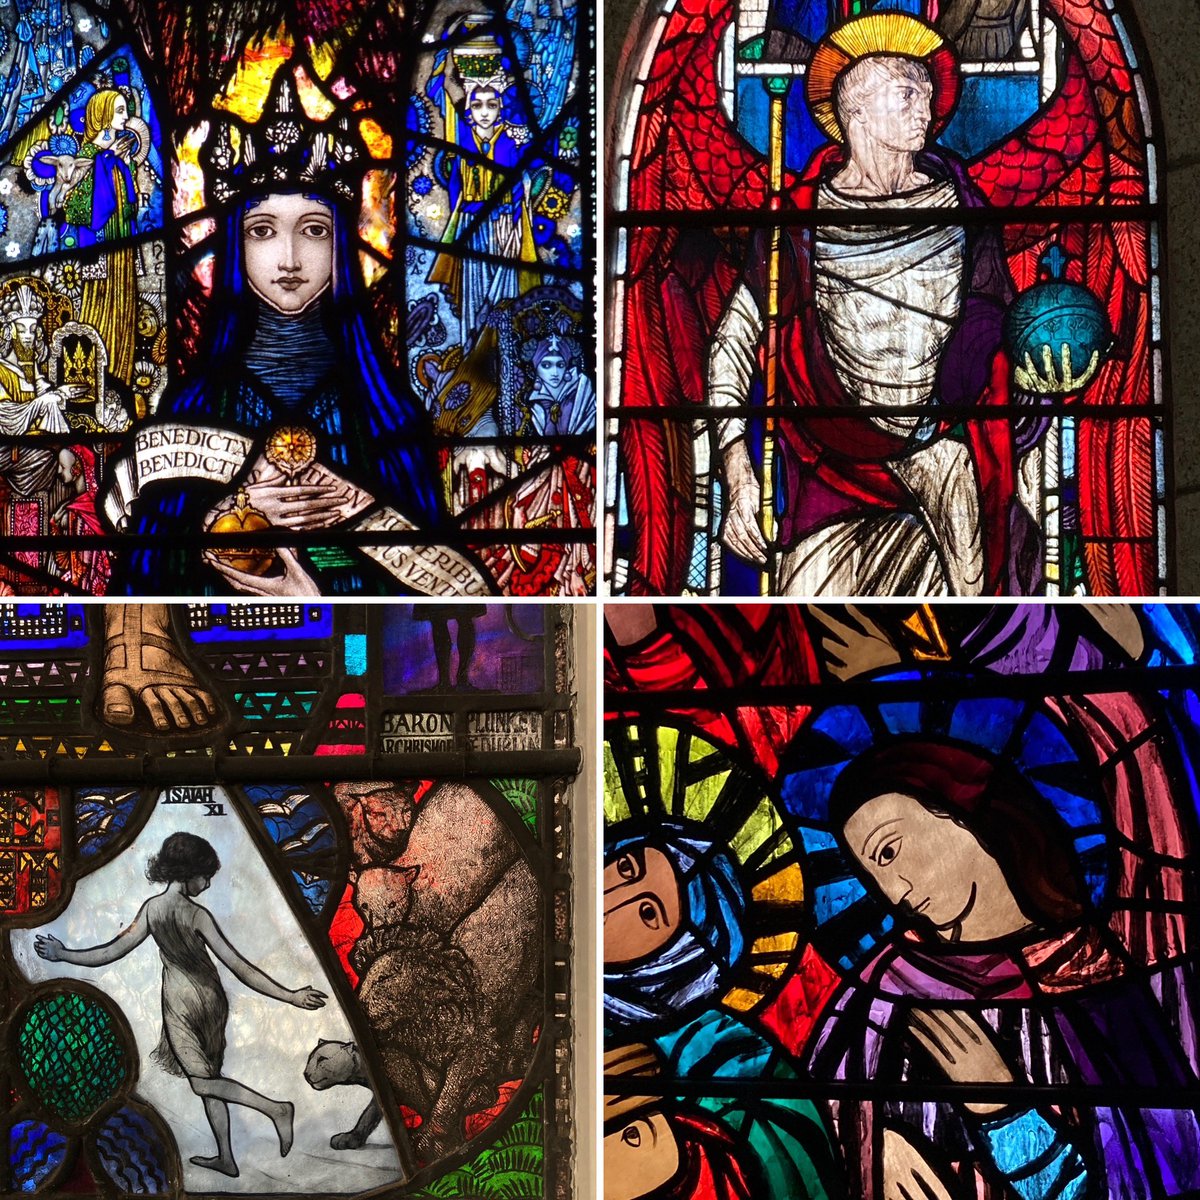 Day One of the @stainedglassmus Dublin Study Tour - stained glass by Harry Clarke, Wilhelmina Geddes, Michael Healy, Evie Hone and others. Expert guides. Looking forward to Day Two! #StainedGlass